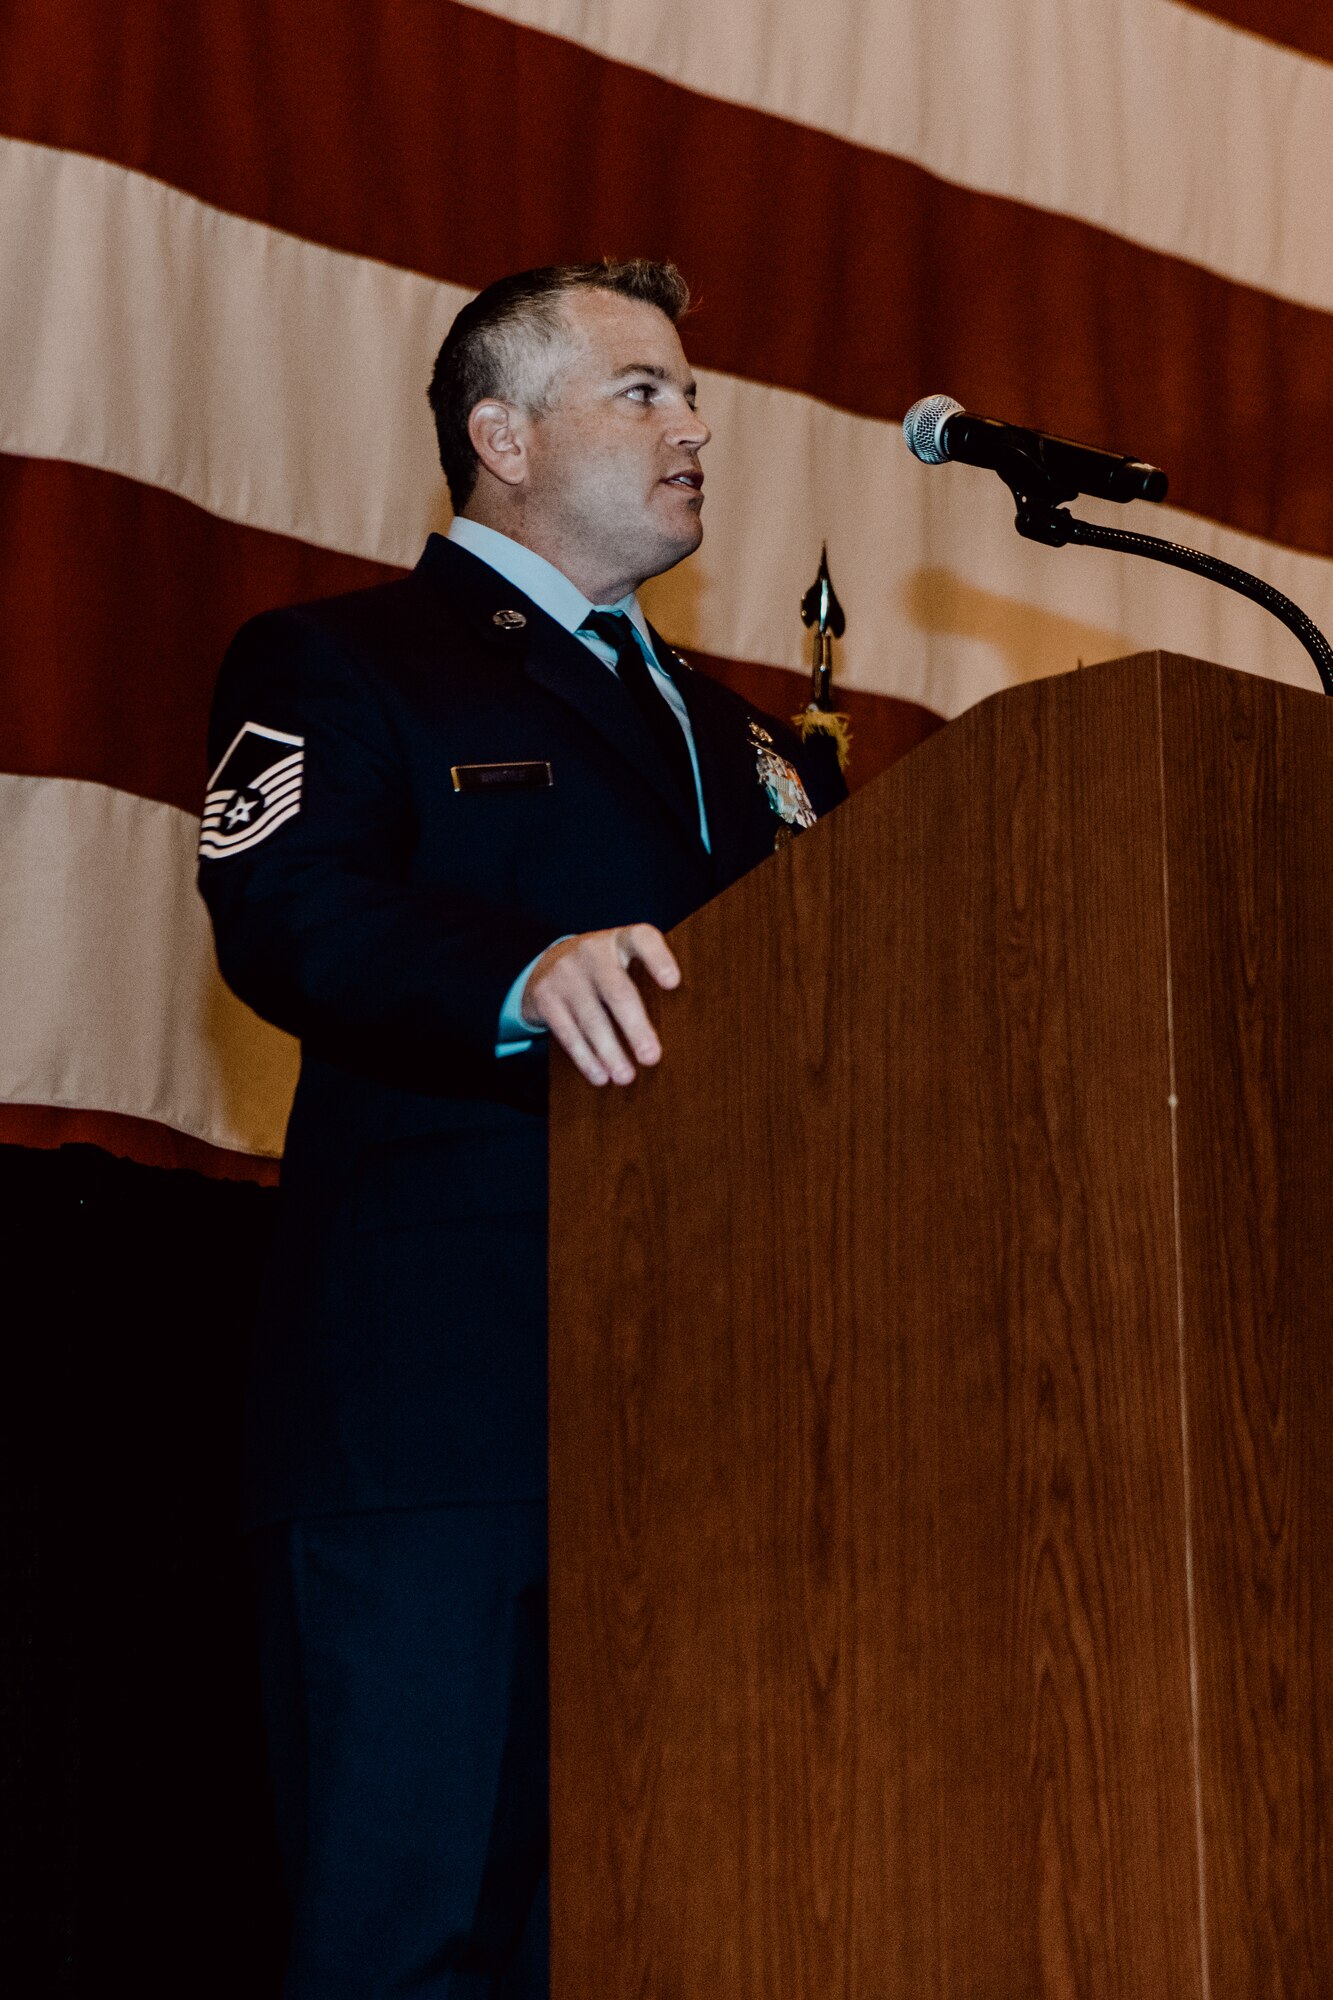 Master Sgt. Bryan Whittle, assigned to the 205th Engineering and Installation Squadron, talks about the honor of receiving the Airman’s Medal during a ceremony at Will Rogers Air National Guard Base in Oklahoma City, Dec. 8, 2019. Whittle received the award for his heroic actions that prevented an active shooter from taking innocent lives. (U.S. Air National Guard photo by Staff Sgt. Jordan Martin)